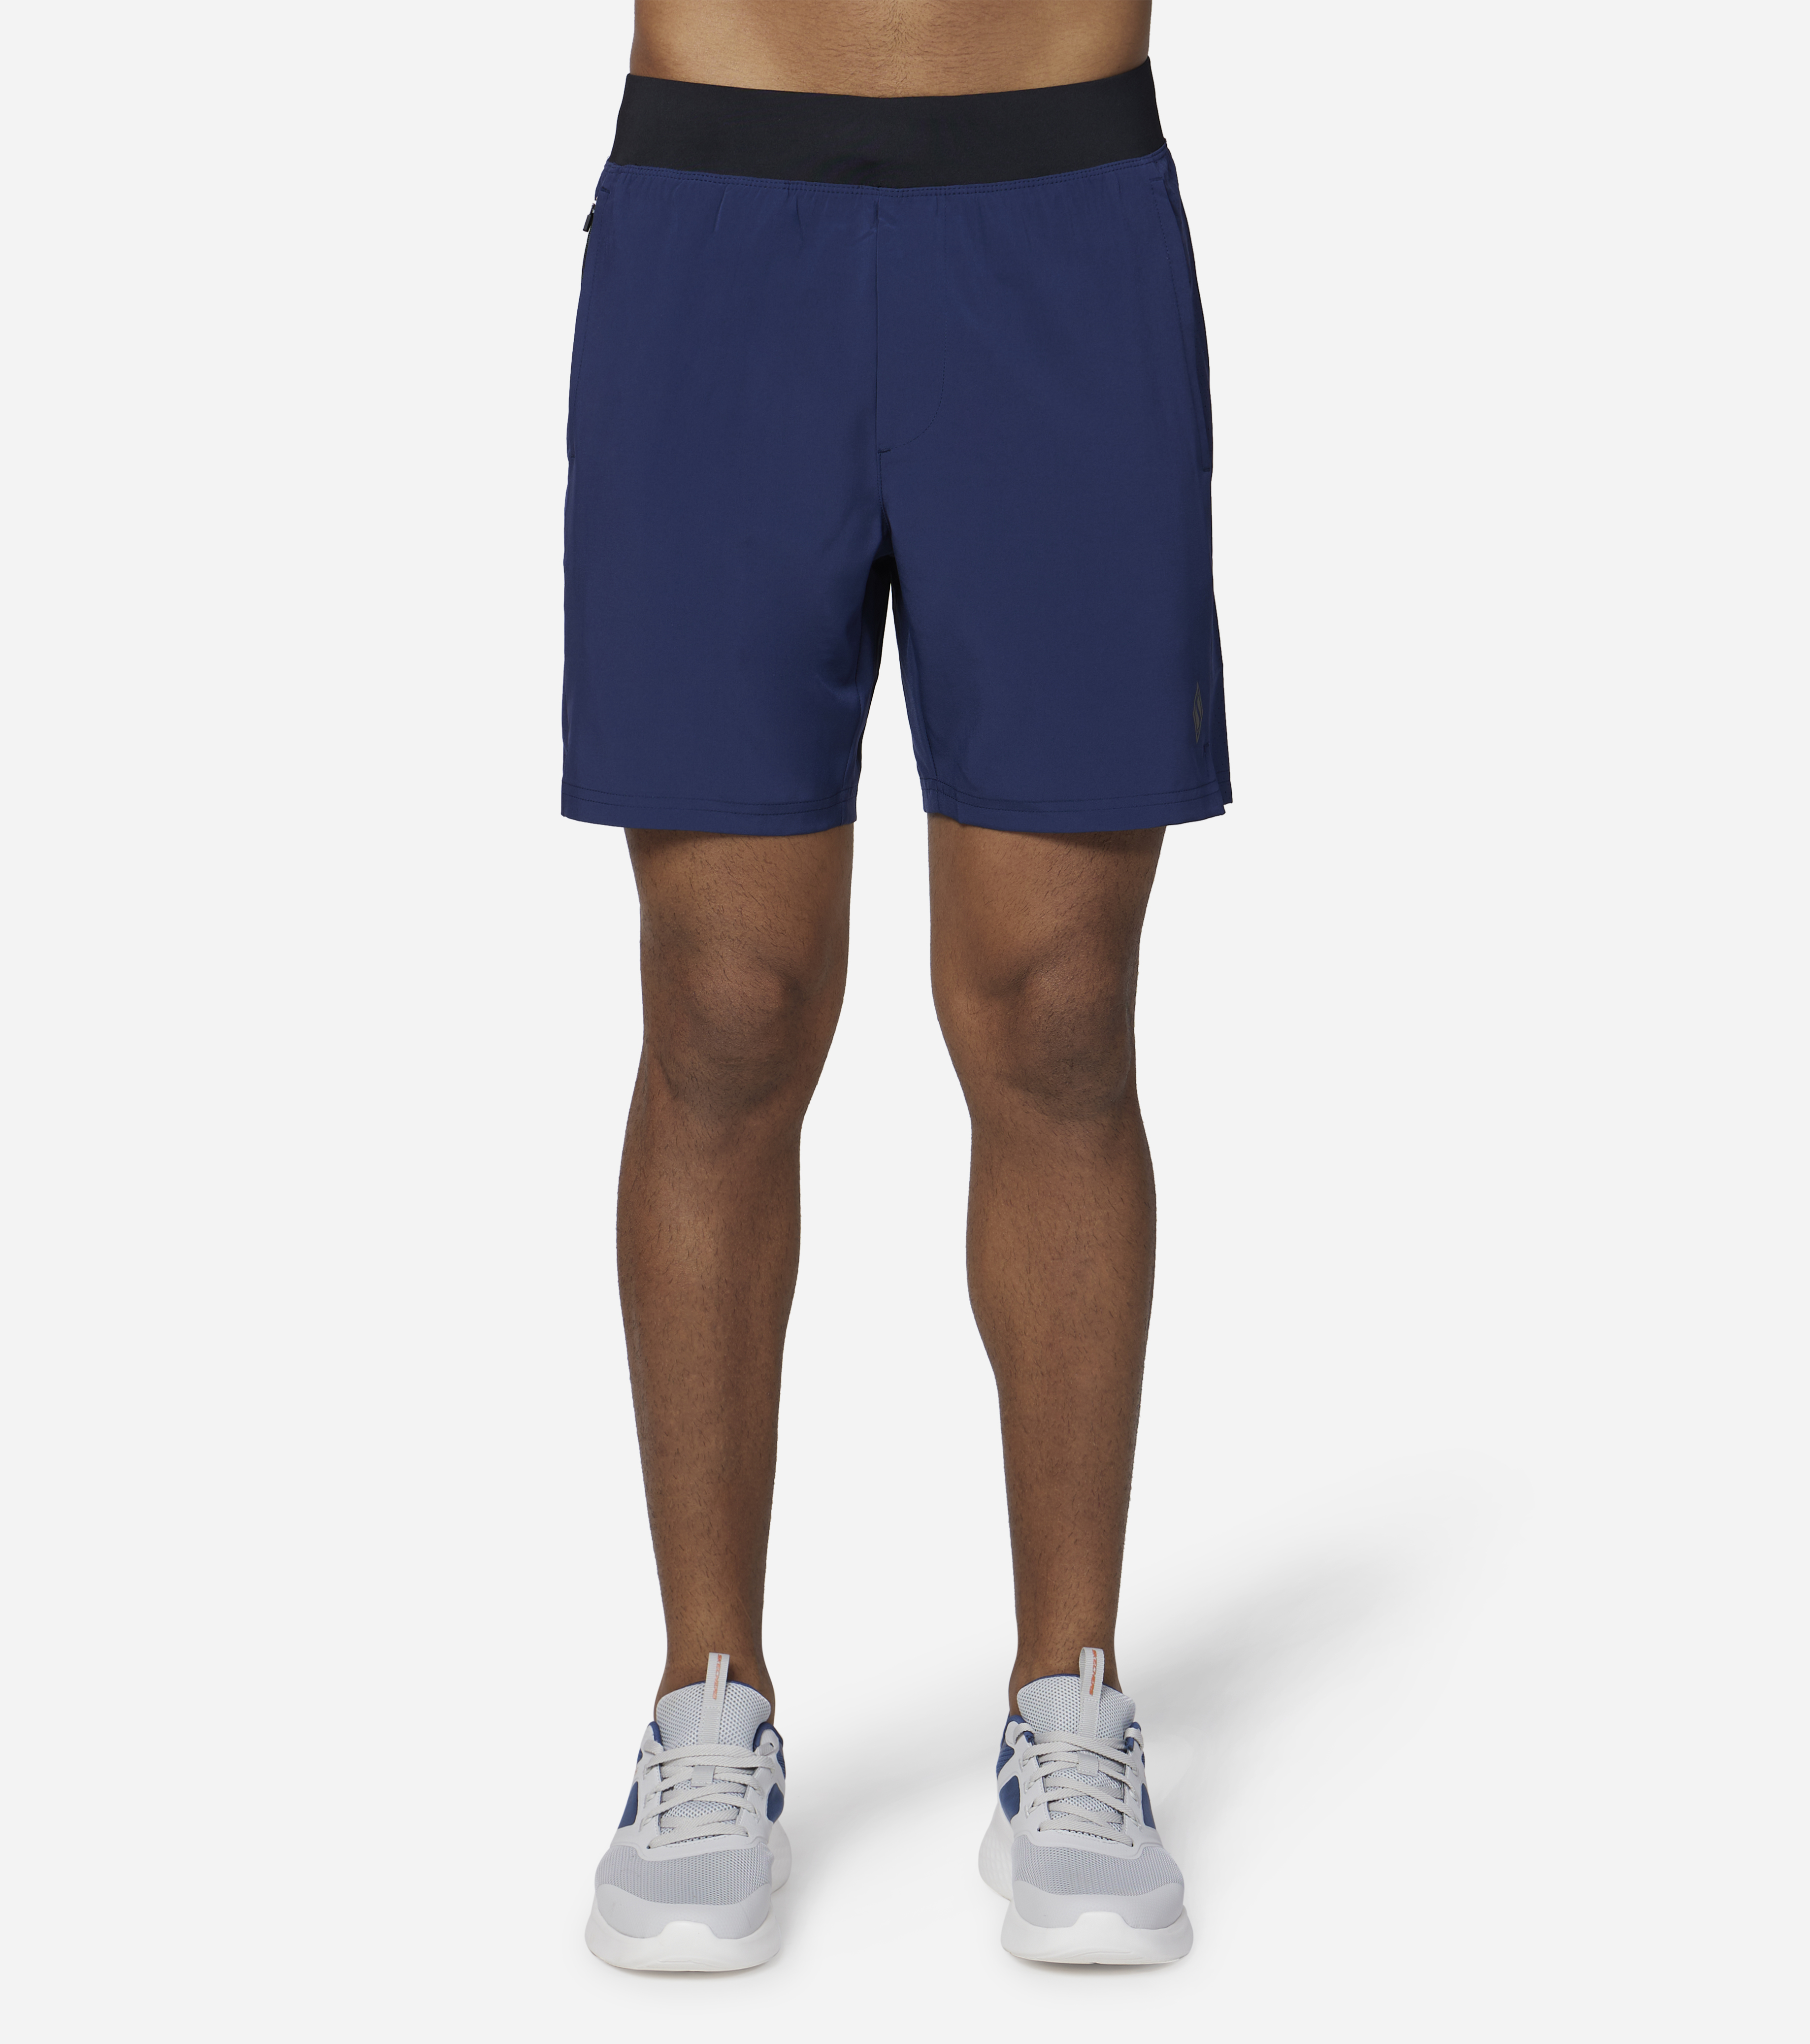 MOVEMENT 7 inch SHORT II, NNNAVY Apparel Lateral View